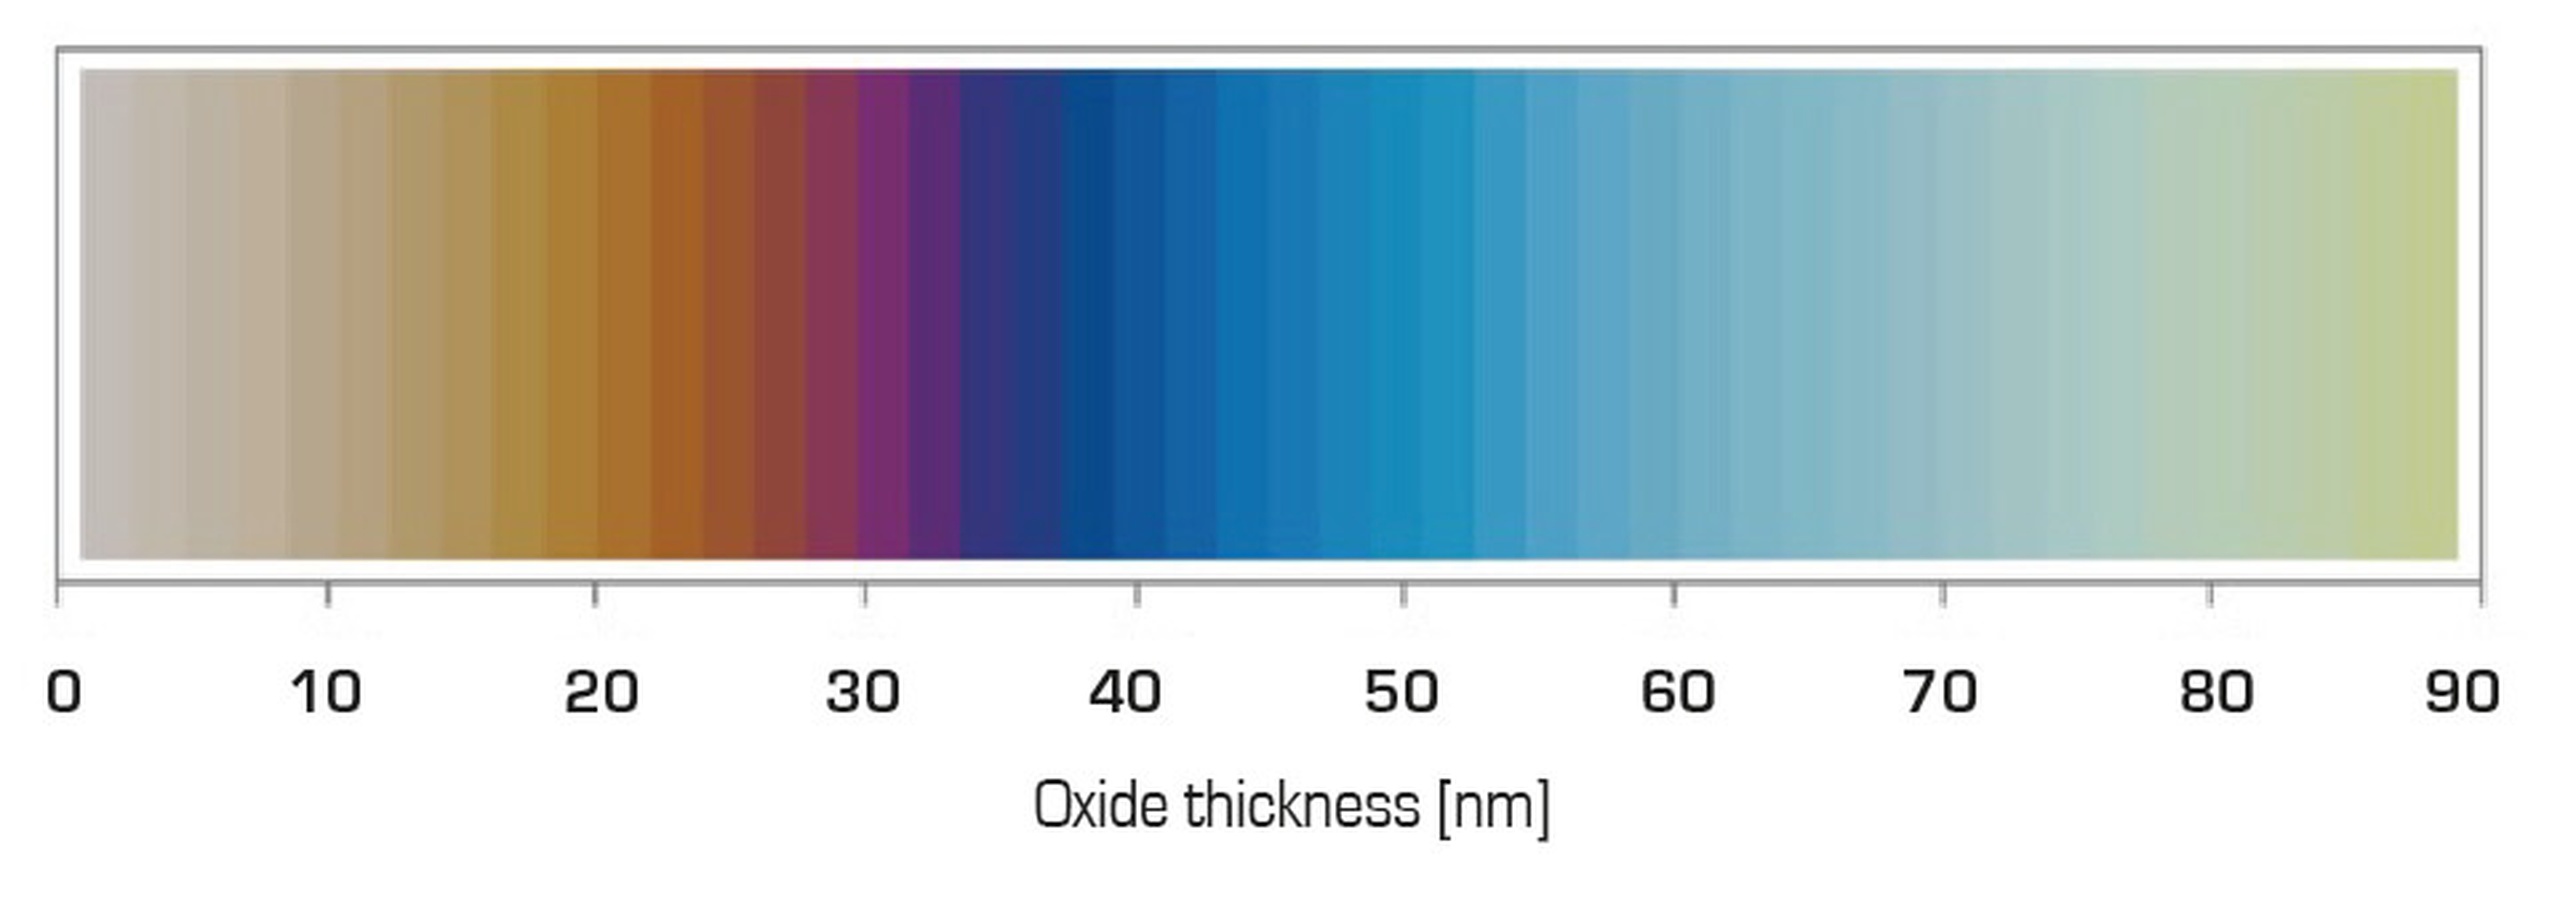 Interference color scale